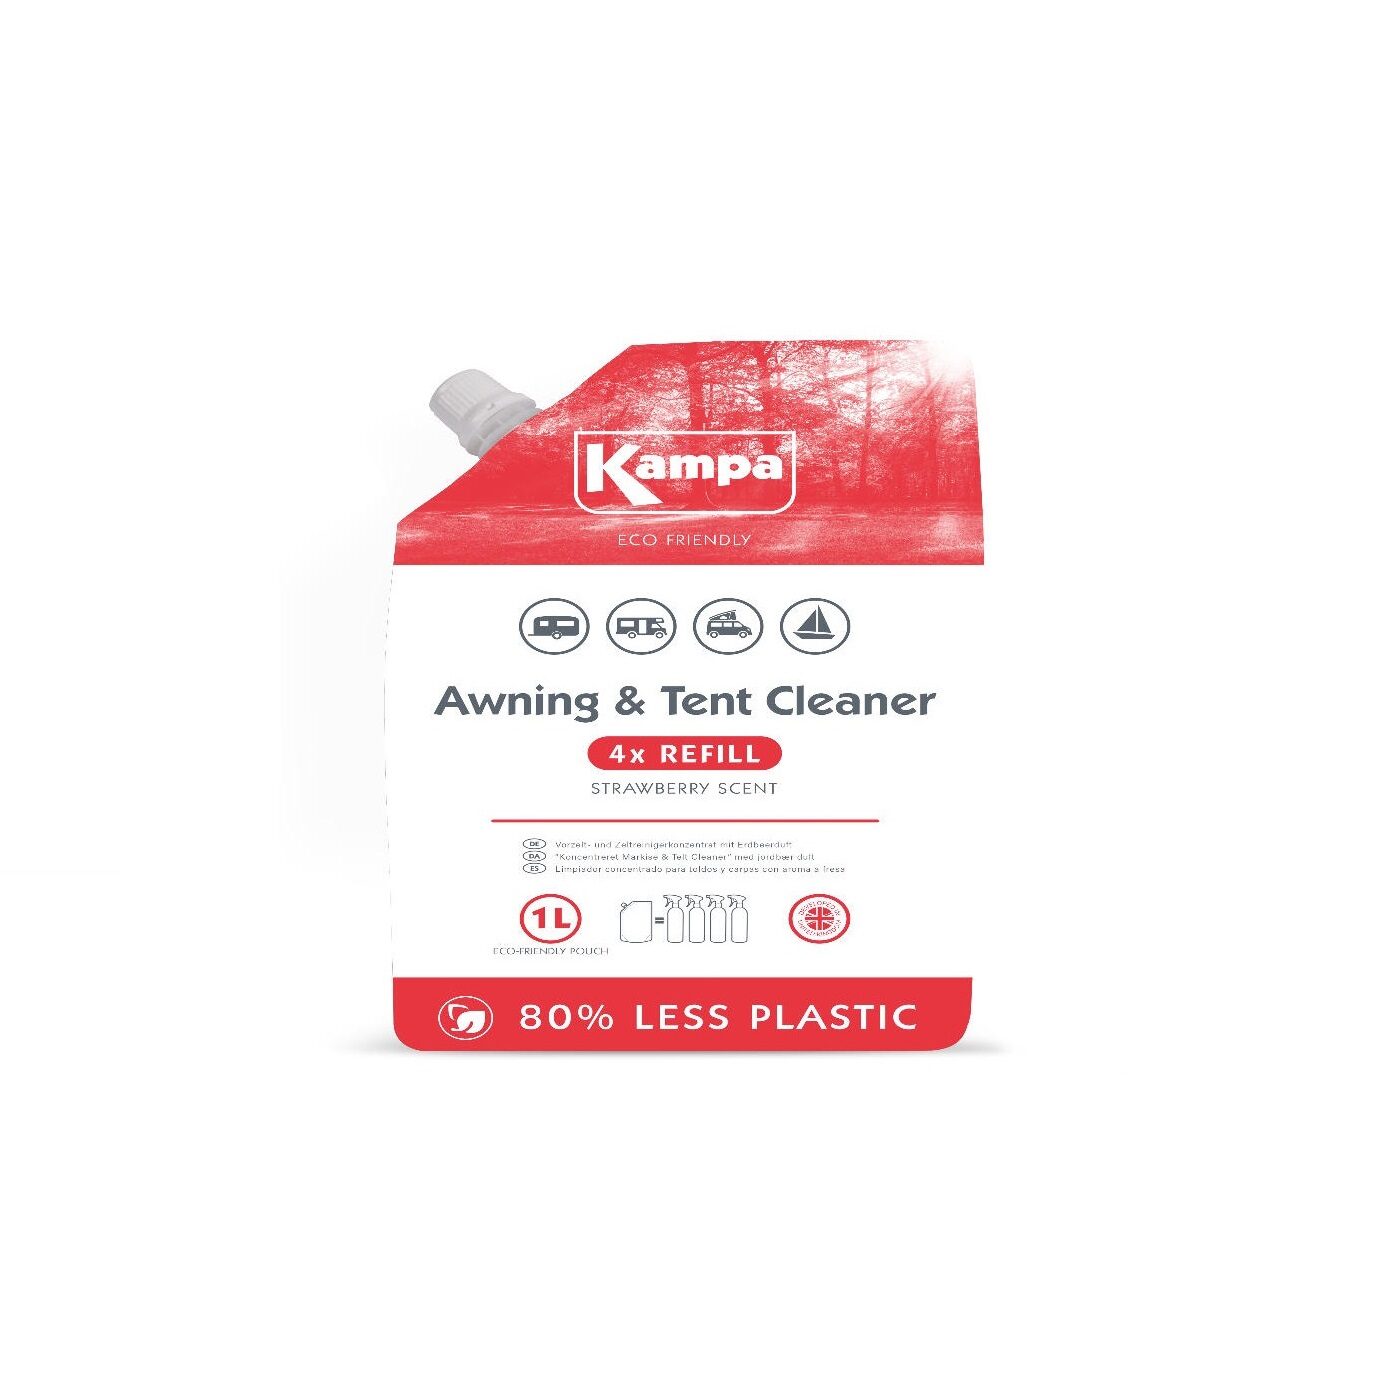 Kampa awning and tent cleaner refill